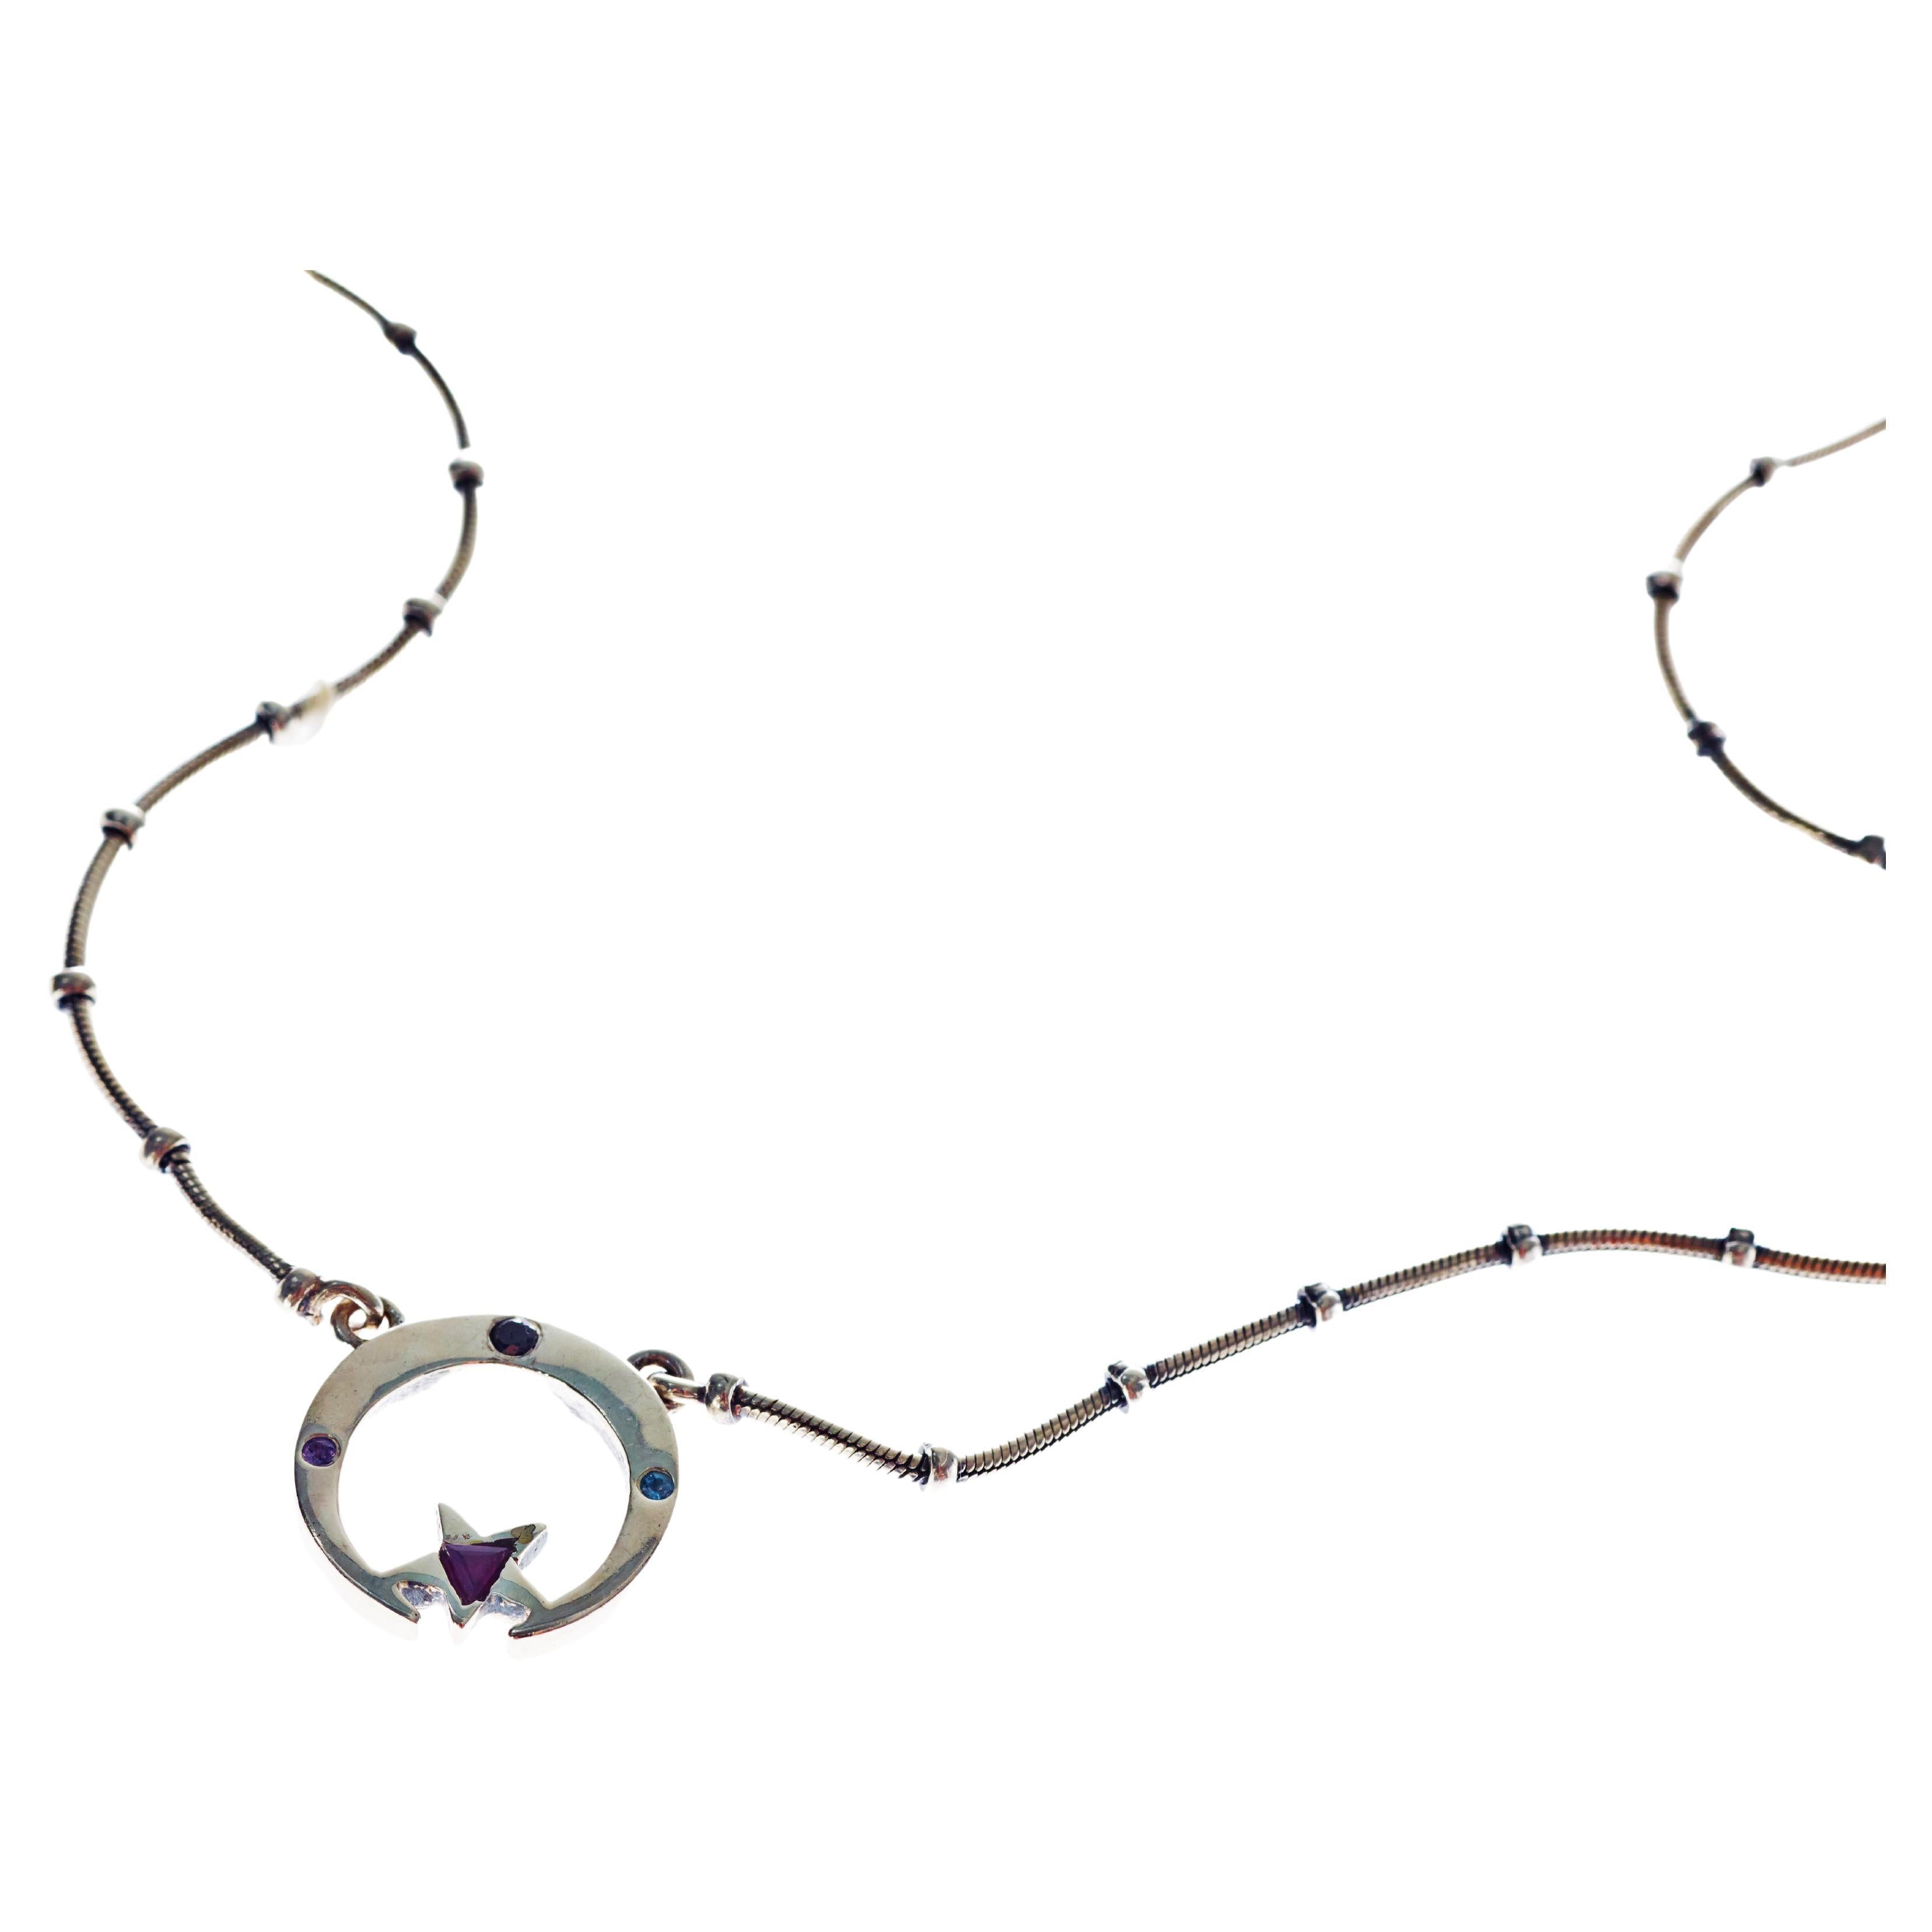 Aquamarine Blue Sapphire Ruby Emerald Crescent Moon Star Necklace Silver Chain

The word “crescent” comes from the Latin term ceres meaning to “bring forth, create” and crescere, the Latin term for “grow, thrive”.
The Crescent Moon is used as the